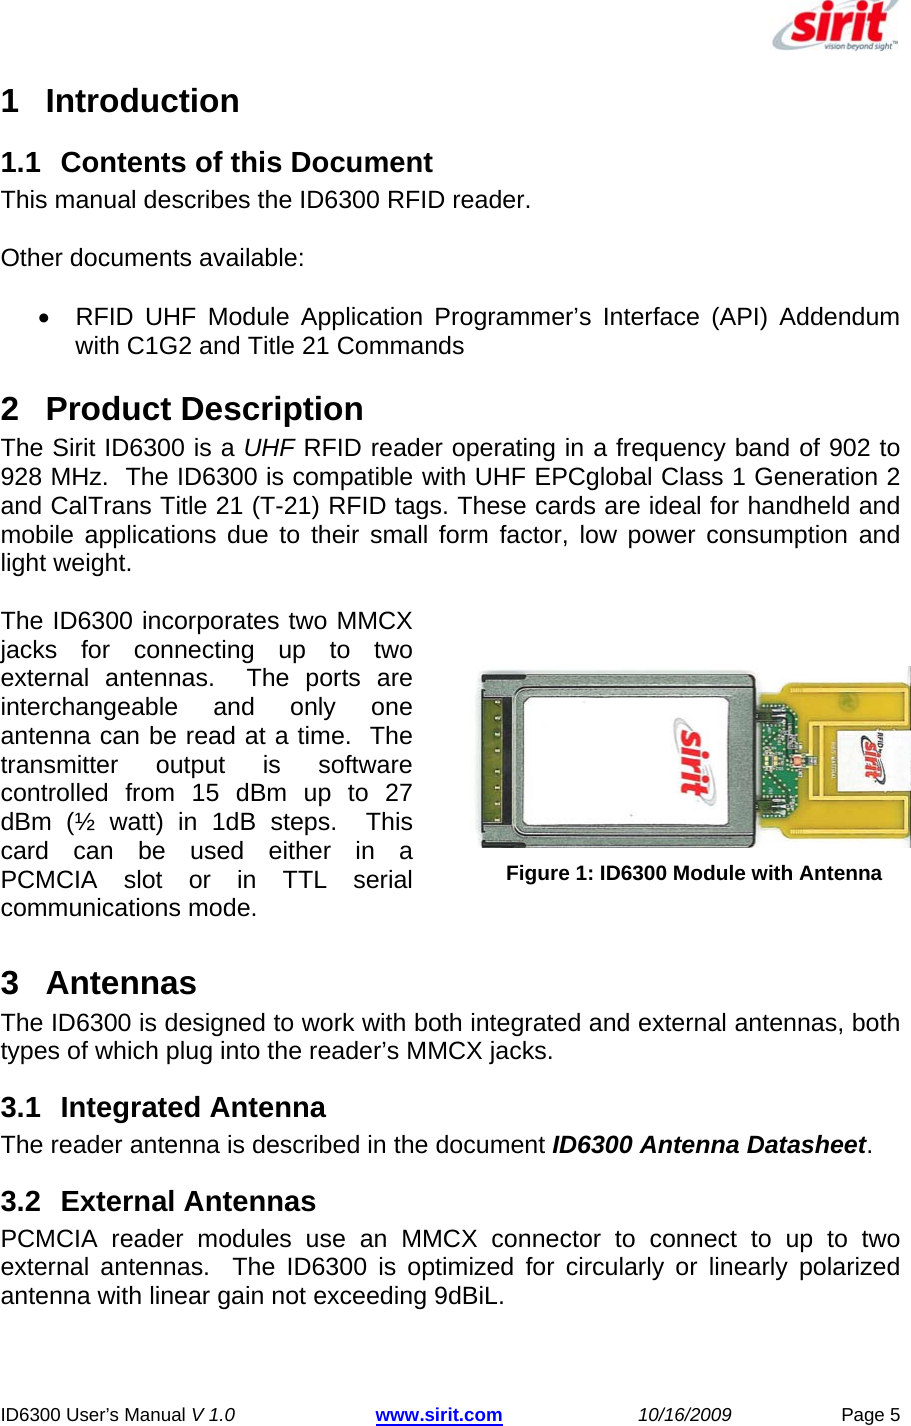  ID6300 User’s Manual V 1.0 www.sirit.com 10/16/2009 Page 5 1 Introduction  1.1  Contents of this Document  This manual describes the ID6300 RFID reader.  Other documents available:  •  RFID UHF Module Application Programmer’s Interface (API) Addendum with C1G2 and Title 21 Commands 2  Product Description  The Sirit ID6300 is a UHF RFID reader operating in a frequency band of 902 to 928 MHz.  The ID6300 is compatible with UHF EPCglobal Class 1 Generation 2 and CalTrans Title 21 (T-21) RFID tags. These cards are ideal for handheld and mobile applications due to their small form factor, low power consumption and light weight.   The ID6300 incorporates two MMCX jacks for connecting up to two external antennas.  The ports are interchangeable and only one antenna can be read at a time.  The transmitter output is software controlled from 15 dBm up to 27 dBm (½ watt) in 1dB steps.  This card can be used either in a PCMCIA slot or in TTL serial communications mode.   Figure 1: ID6300 Module with Antenna3 Antennas The ID6300 is designed to work with both integrated and external antennas, both types of which plug into the reader’s MMCX jacks. 3.1 Integrated Antenna The reader antenna is described in the document ID6300 Antenna Datasheet. 3.2  External Antennas  PCMCIA reader modules use an MMCX connector to connect to up to two external antennas.  The ID6300 is optimized for circularly or linearly polarized antenna with linear gain not exceeding 9dBiL. 